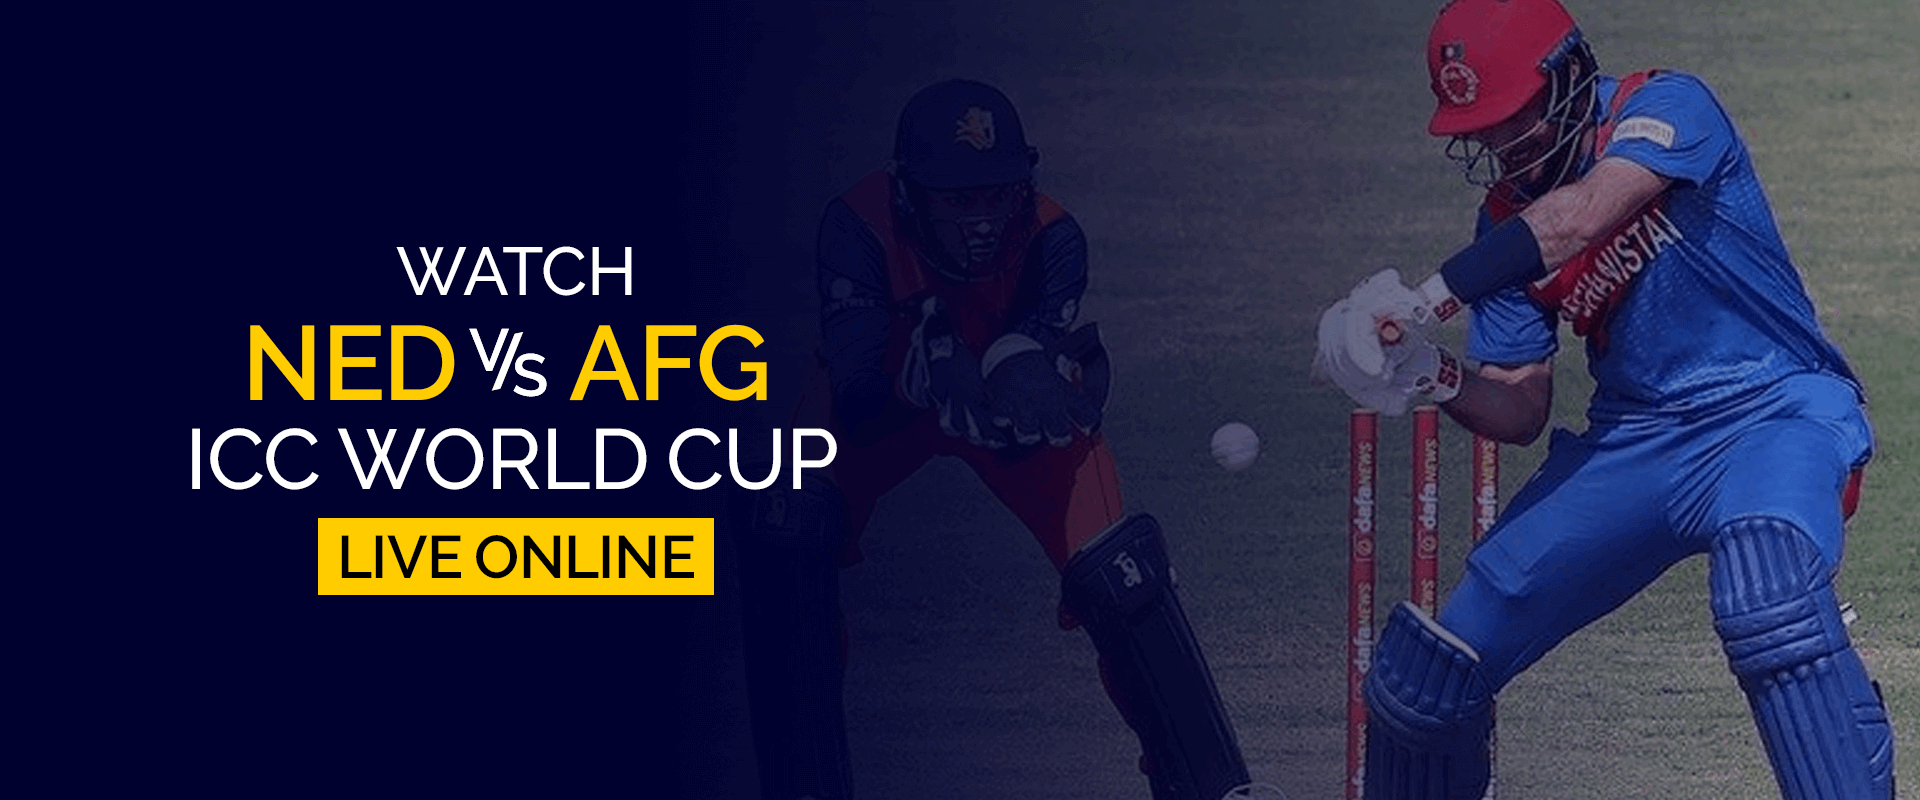 Watch Netherlands vs Afghanistan ICC World Cup Live Online